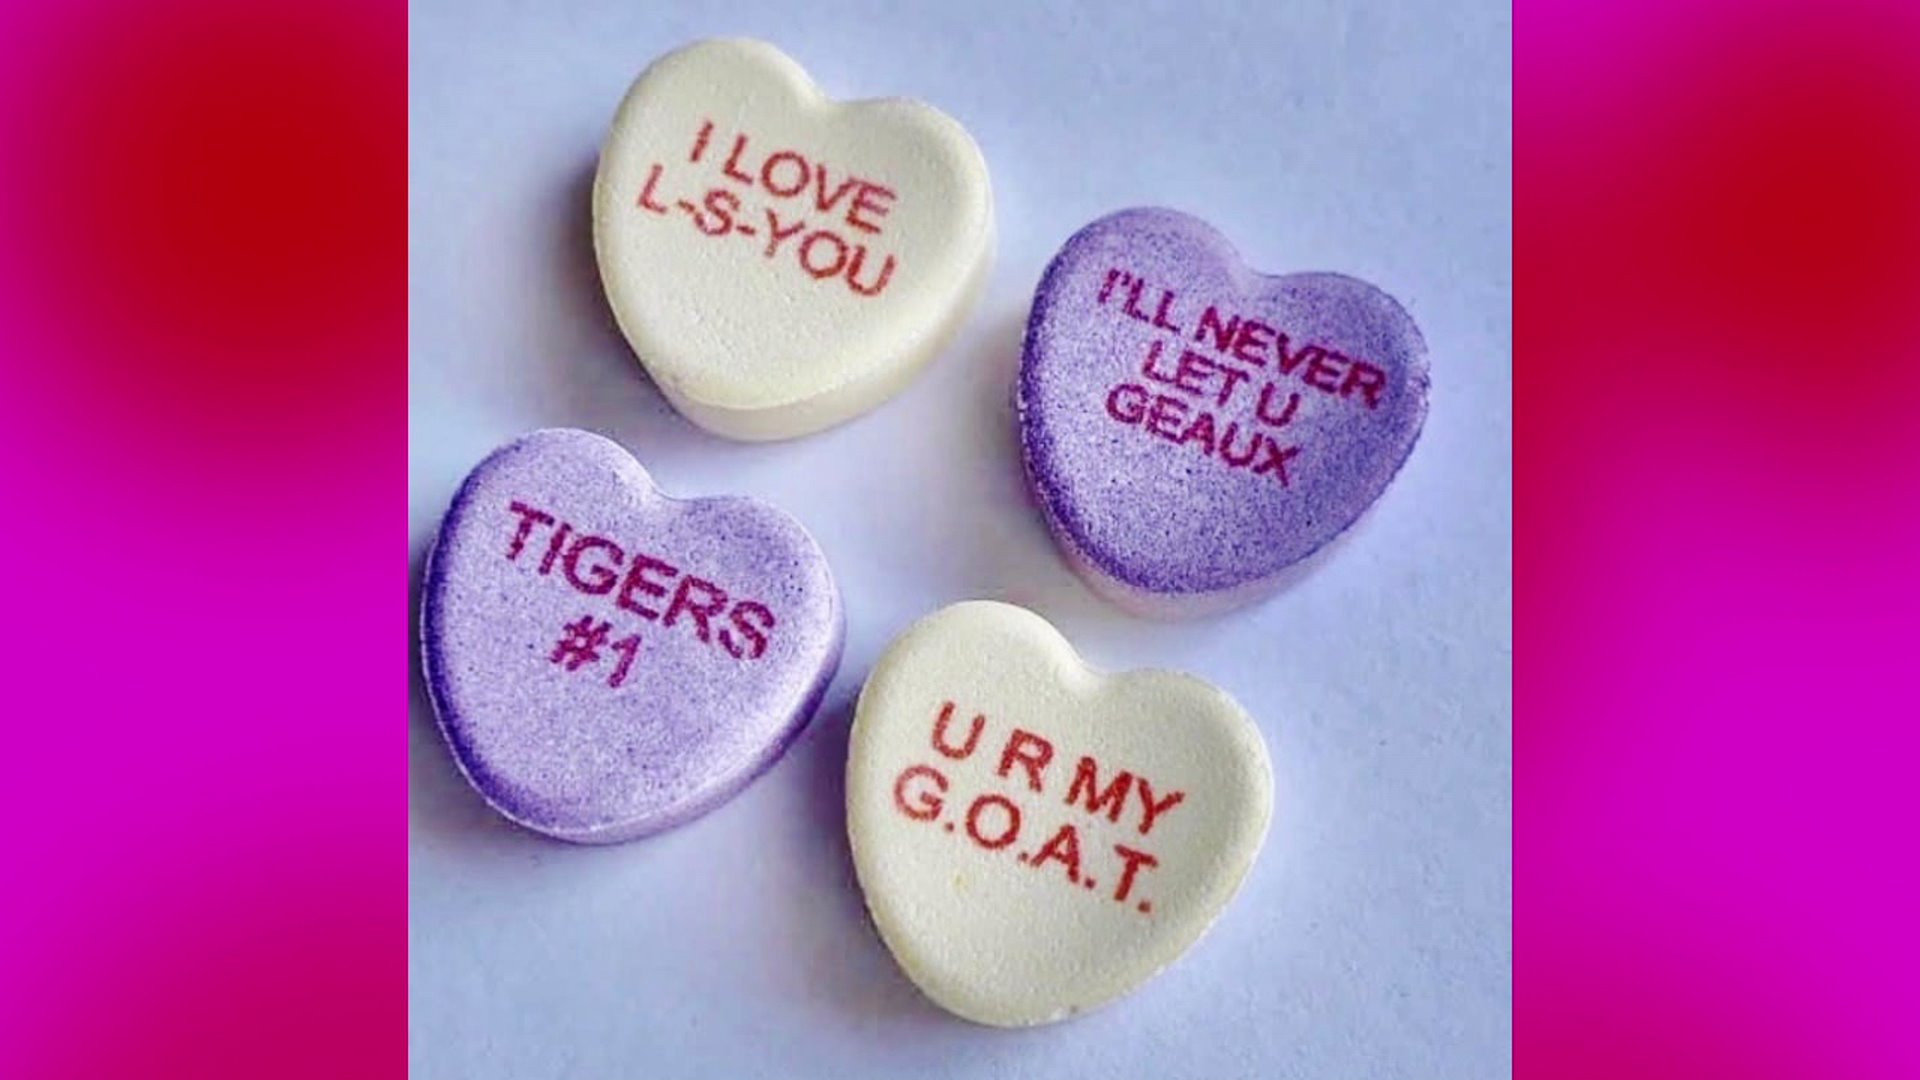 Valentines Day Candy Sayings
 NOLA Candy Hearts with sweet sayings for Valentine’s Day